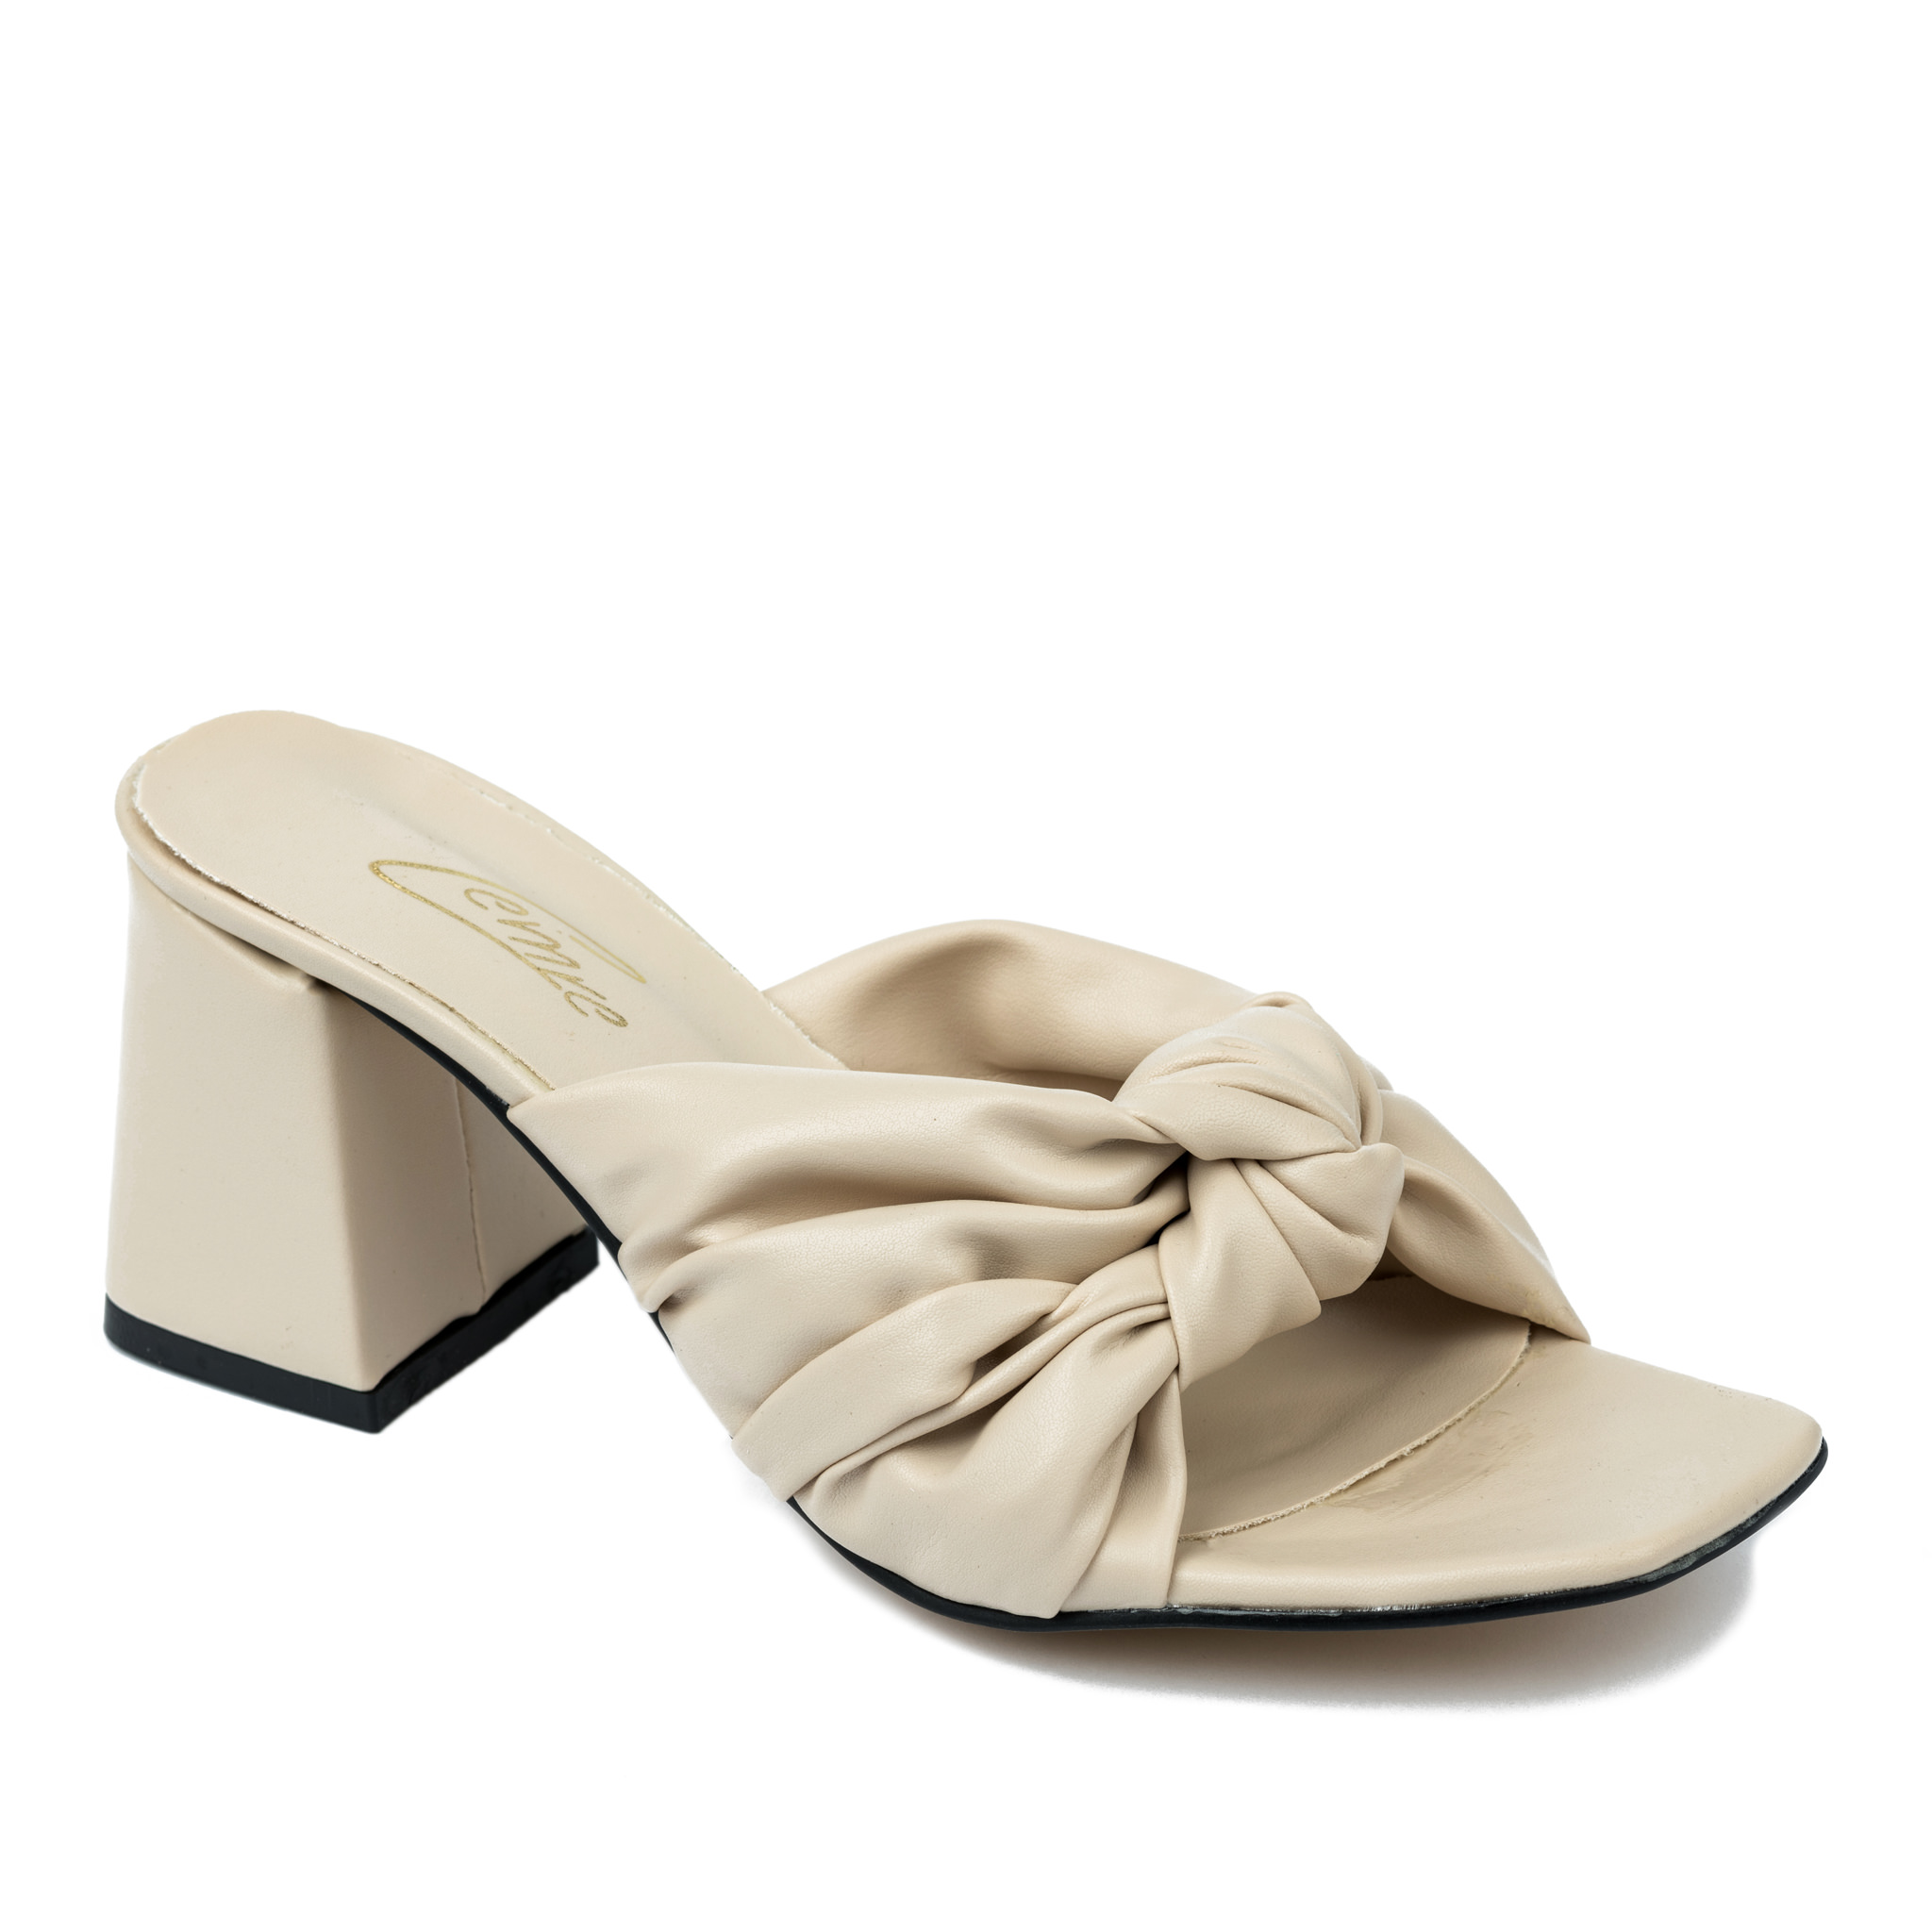 Women Slippers and Mules A249 - BEIGE